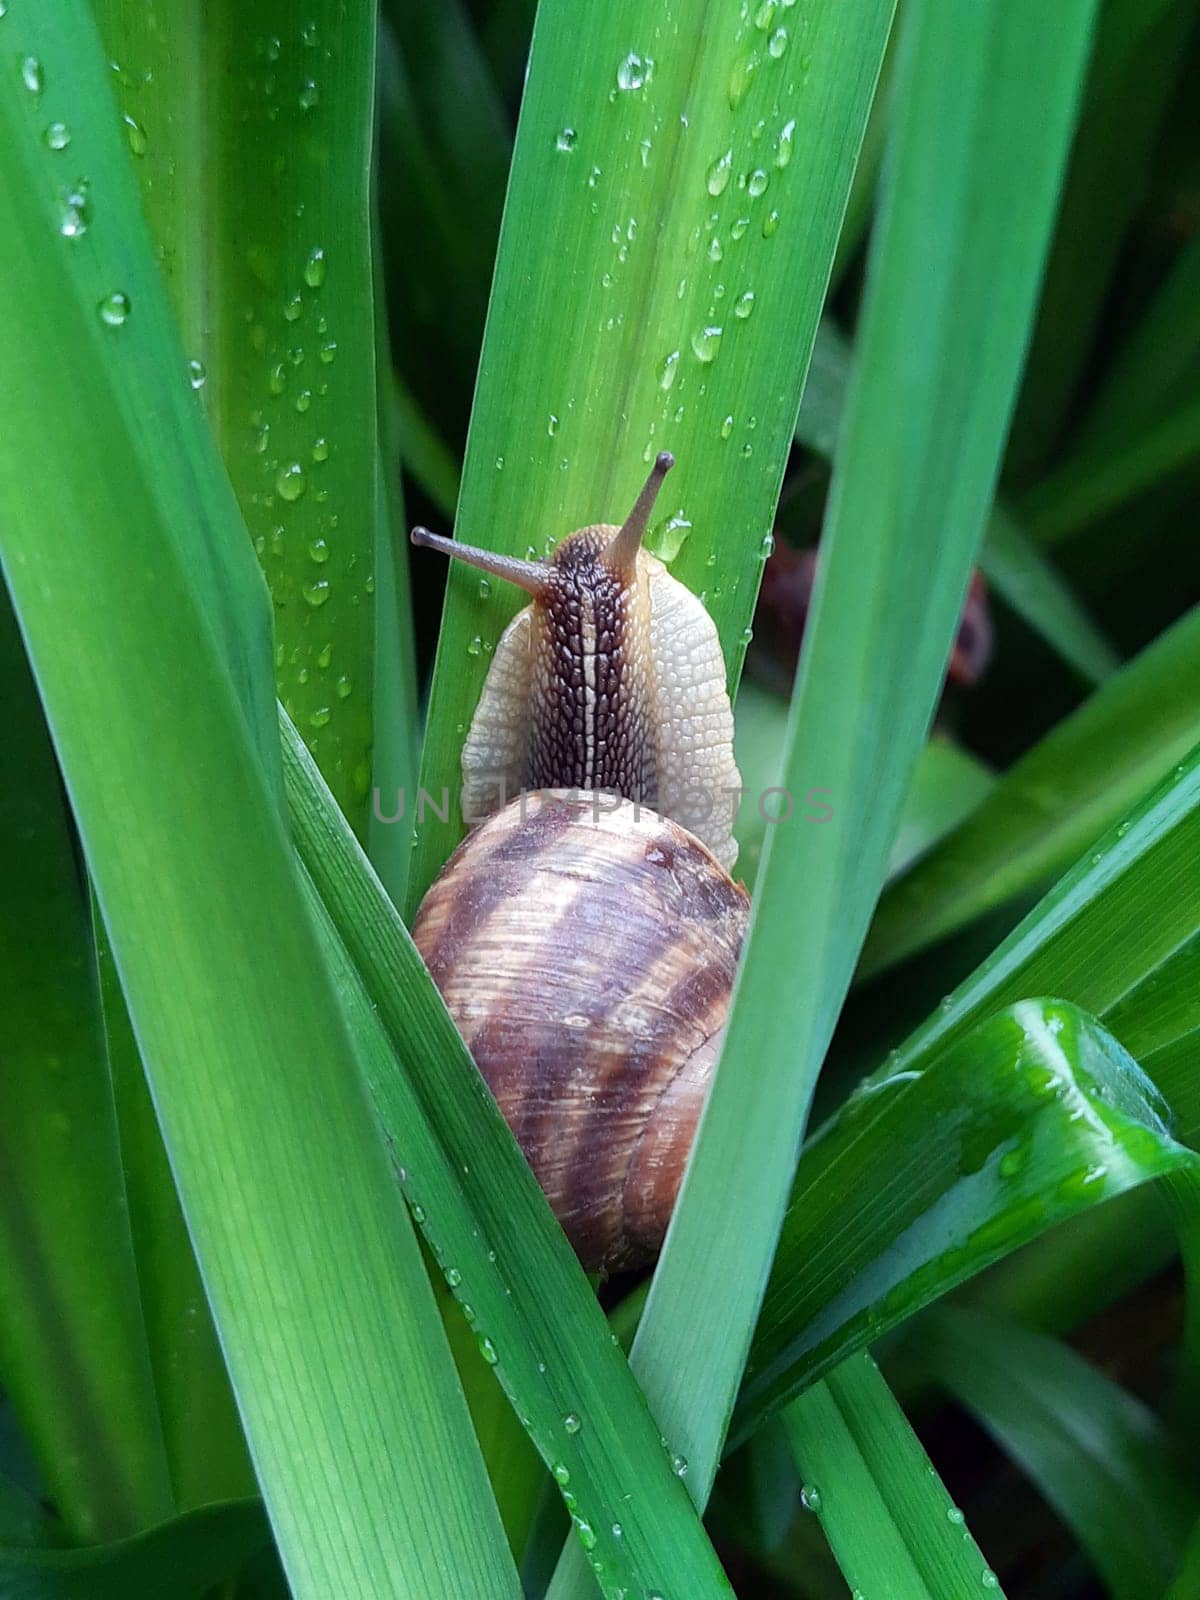 Snail in the green after the rain by Endusik